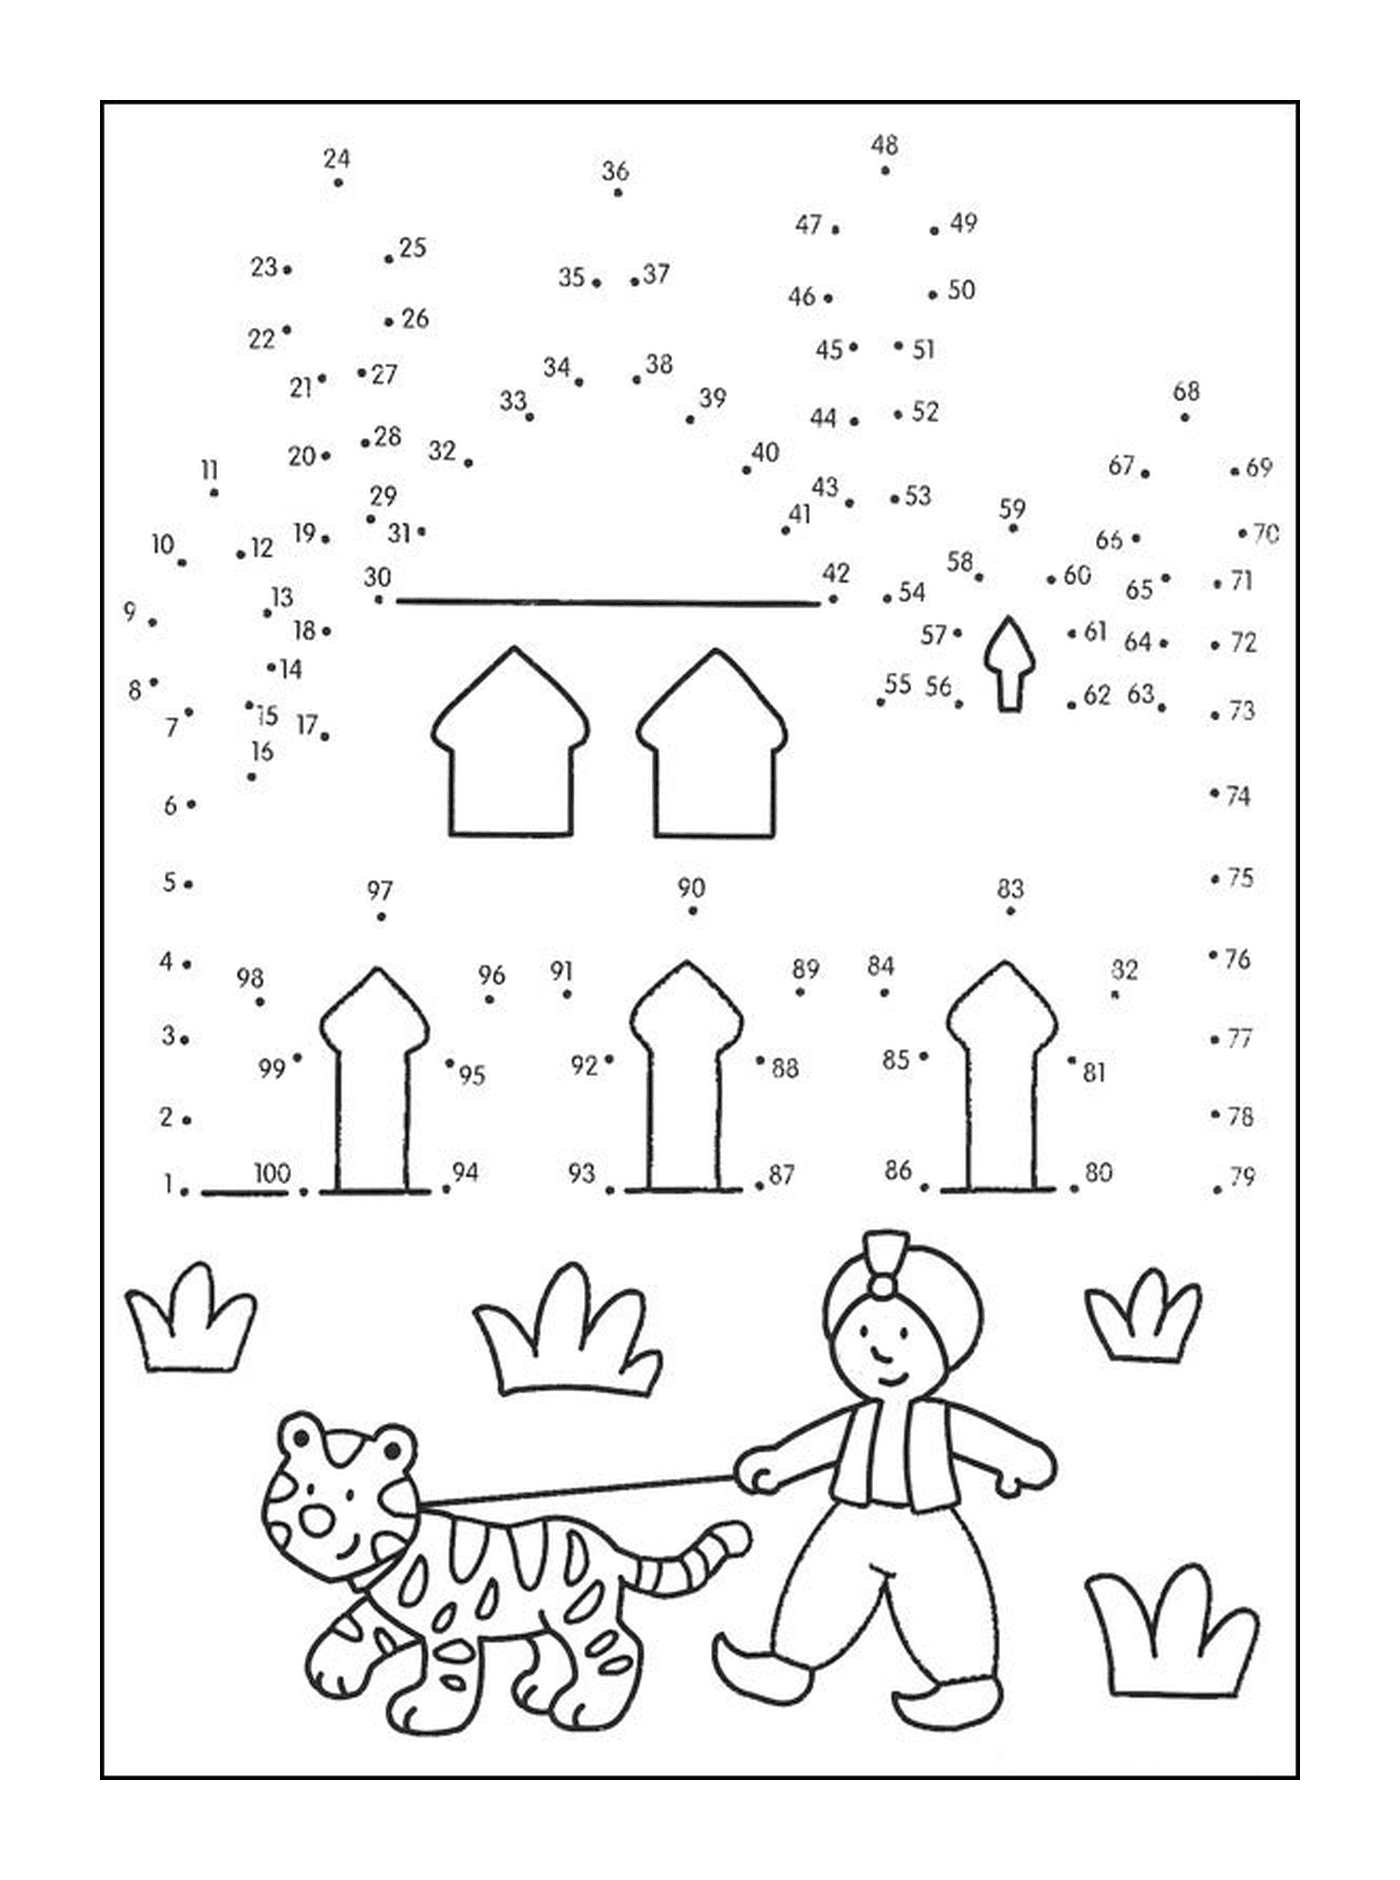  Worksheet to connect with a girl and a cat 